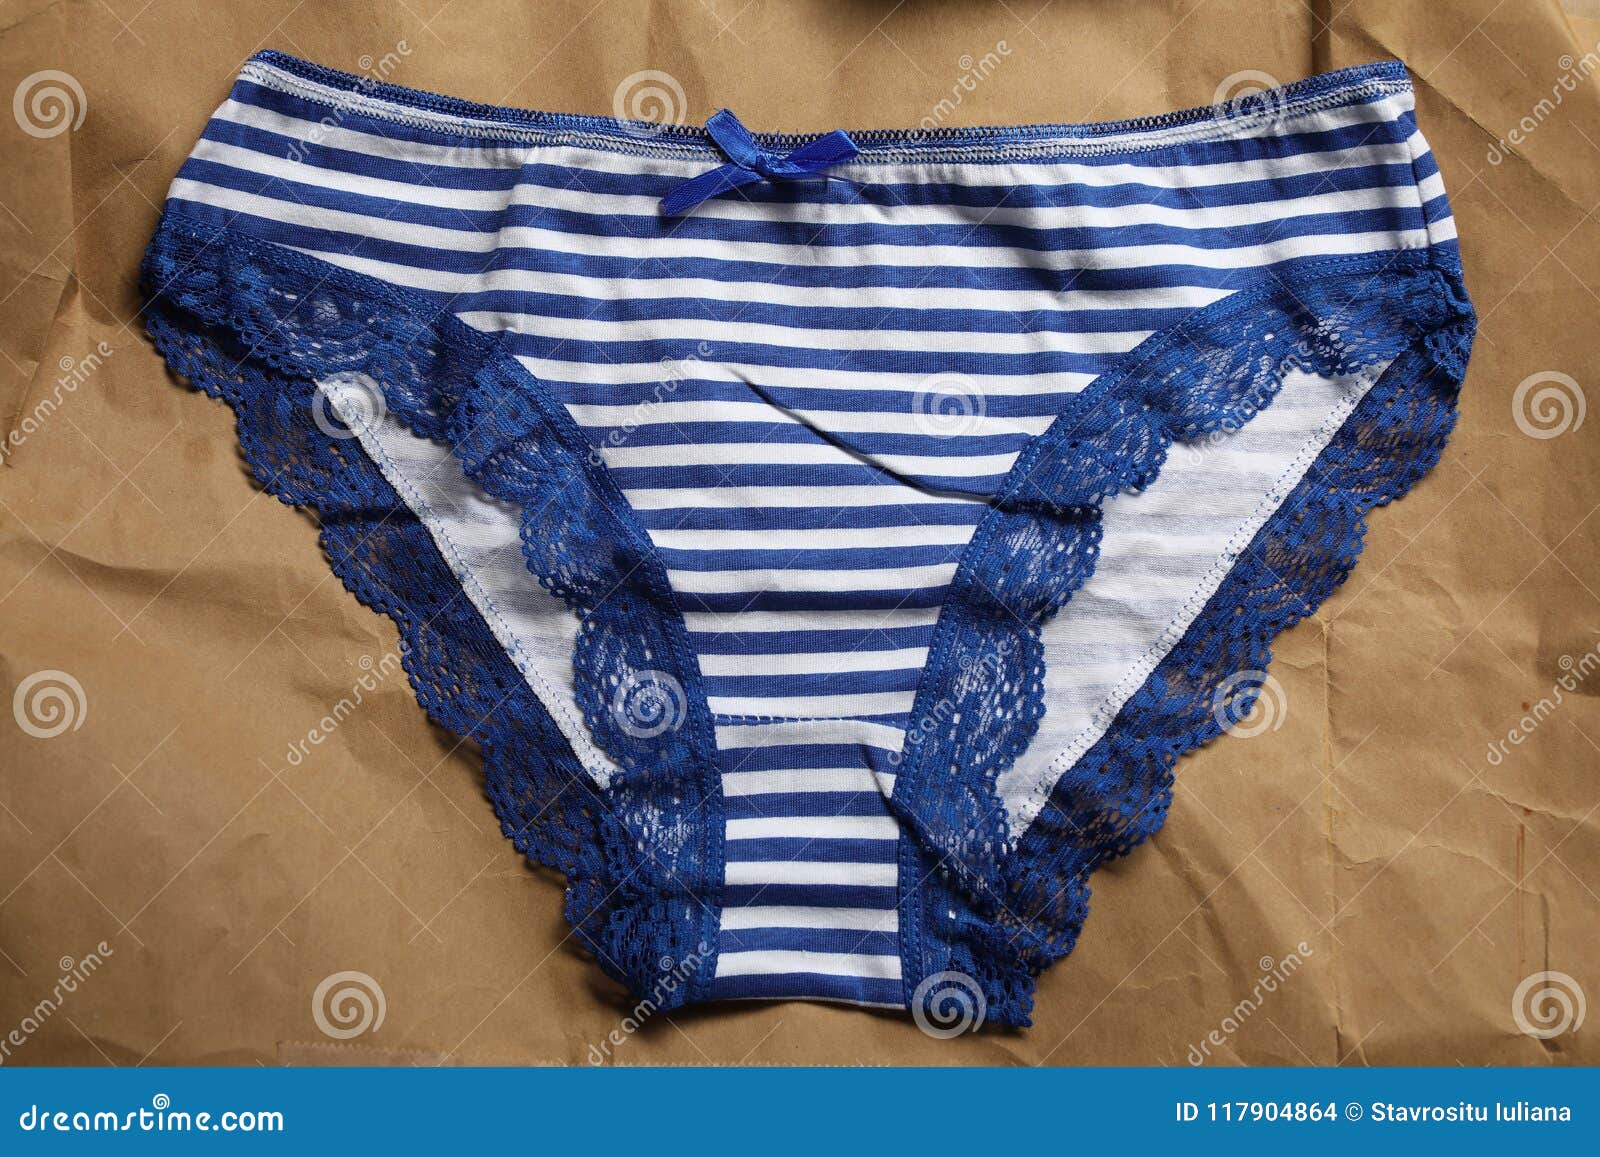 dee schriver recommends Blue And White Striped Panties